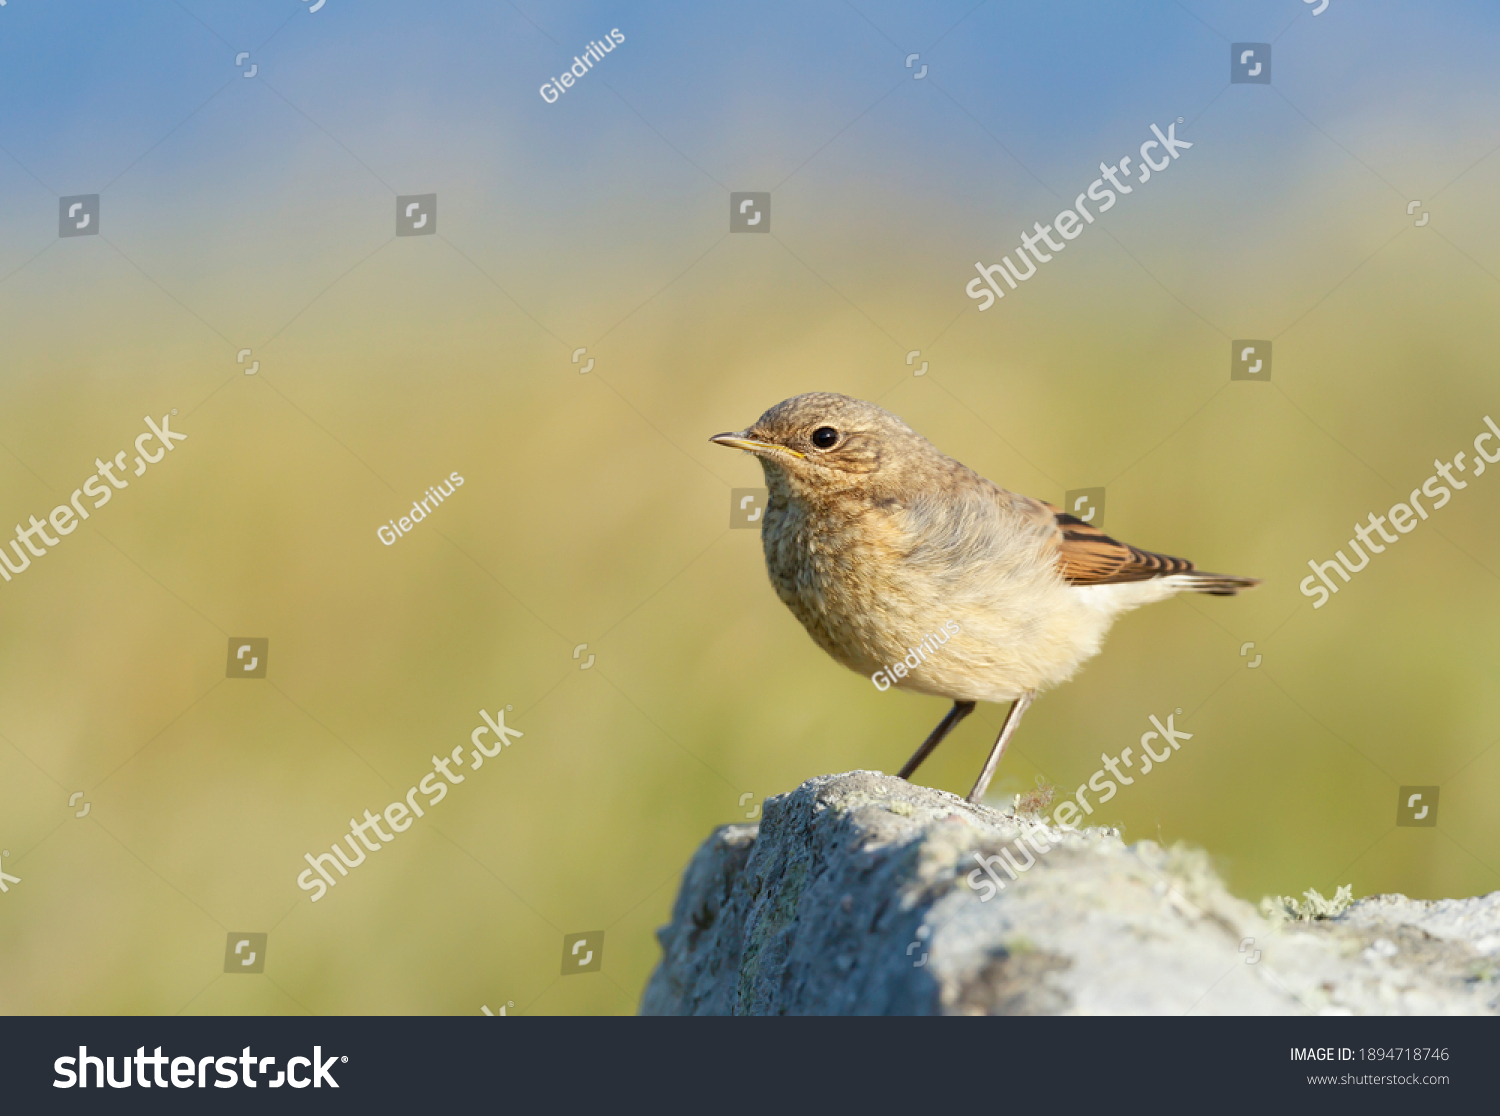 Close up of a juvenile Northern wheatear (Oenanthe oenanthe) perched on a rock against green background in summer, Scotland, UK. #1894718746